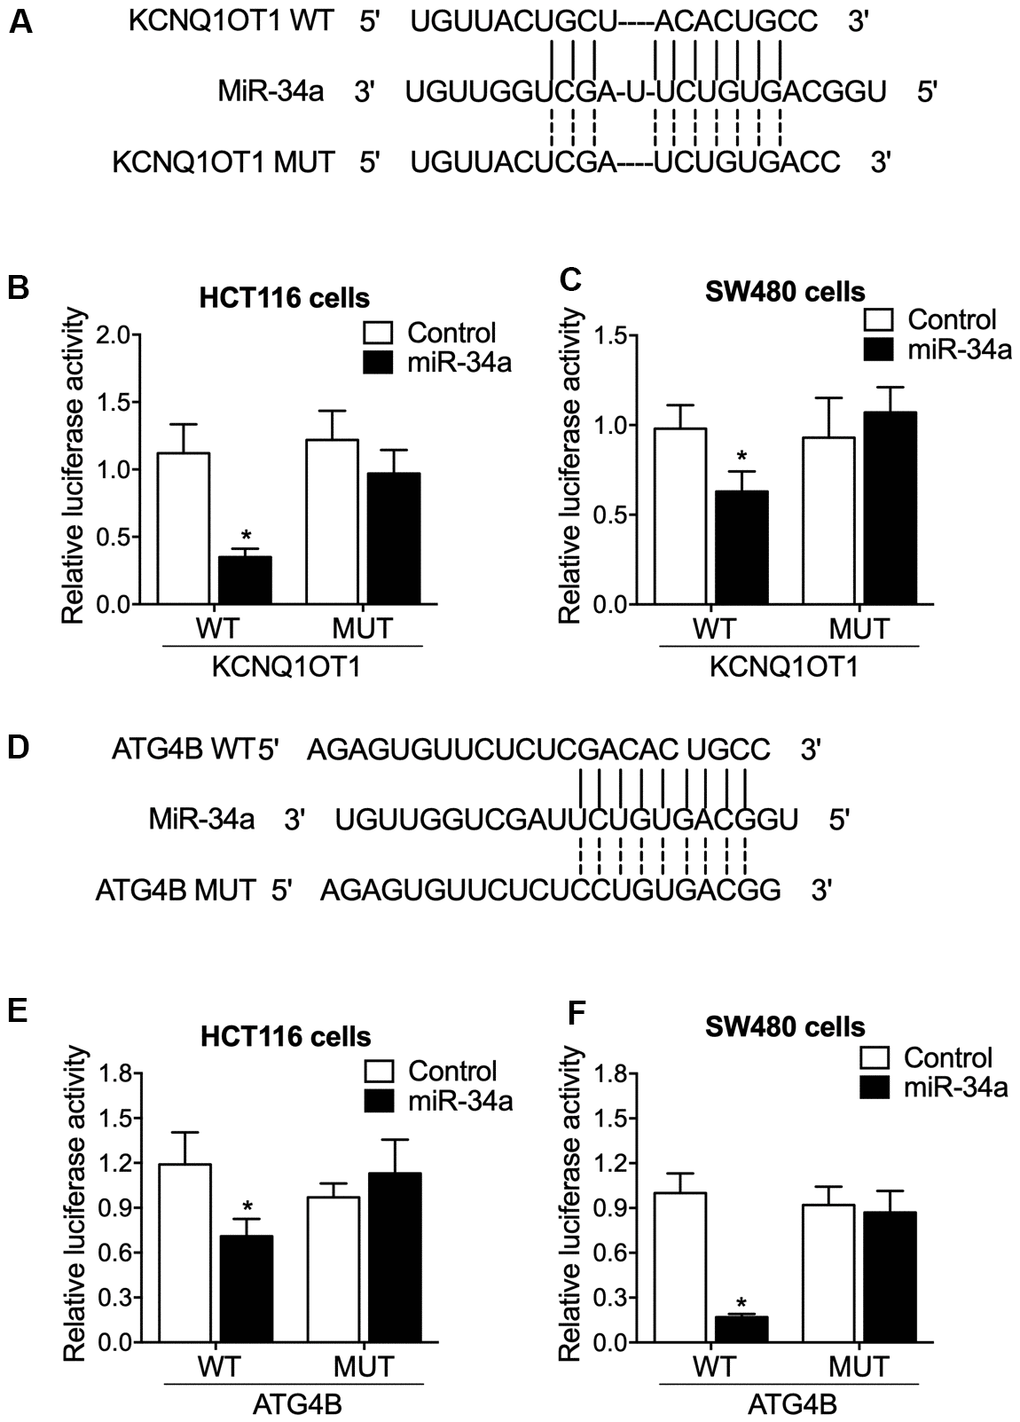 The luciferase activities of KCNQ1OT1 and ATG4B were repressed by miR-34a. (A) Sequence analysis indicated potential binding of miR-34a to KCNQ1OT1. (B) The luciferase activity of KCNQ1OT1 was suppressed by miR-34a in HCT116 cells (statistical analysis: one-way ANOVA; * P value C) The luciferase activity of KCNQ1OT1 was suppressed by miR-34a in SW480 cells (statistical analysis: one-way ANOVA; * P value D) Sequence analysis indicated potential binding of miR-34a to ATG4B. (E) The luciferase activity of ATG4B was suppressed by miR-34a in HCT116 cells (statistical analysis: one-way ANOVA; * P value F) The luciferase activity of K ATG4B was suppressed by miR-34a in SW480 cells (statistical analysis: one-way ANOVA; * P value 